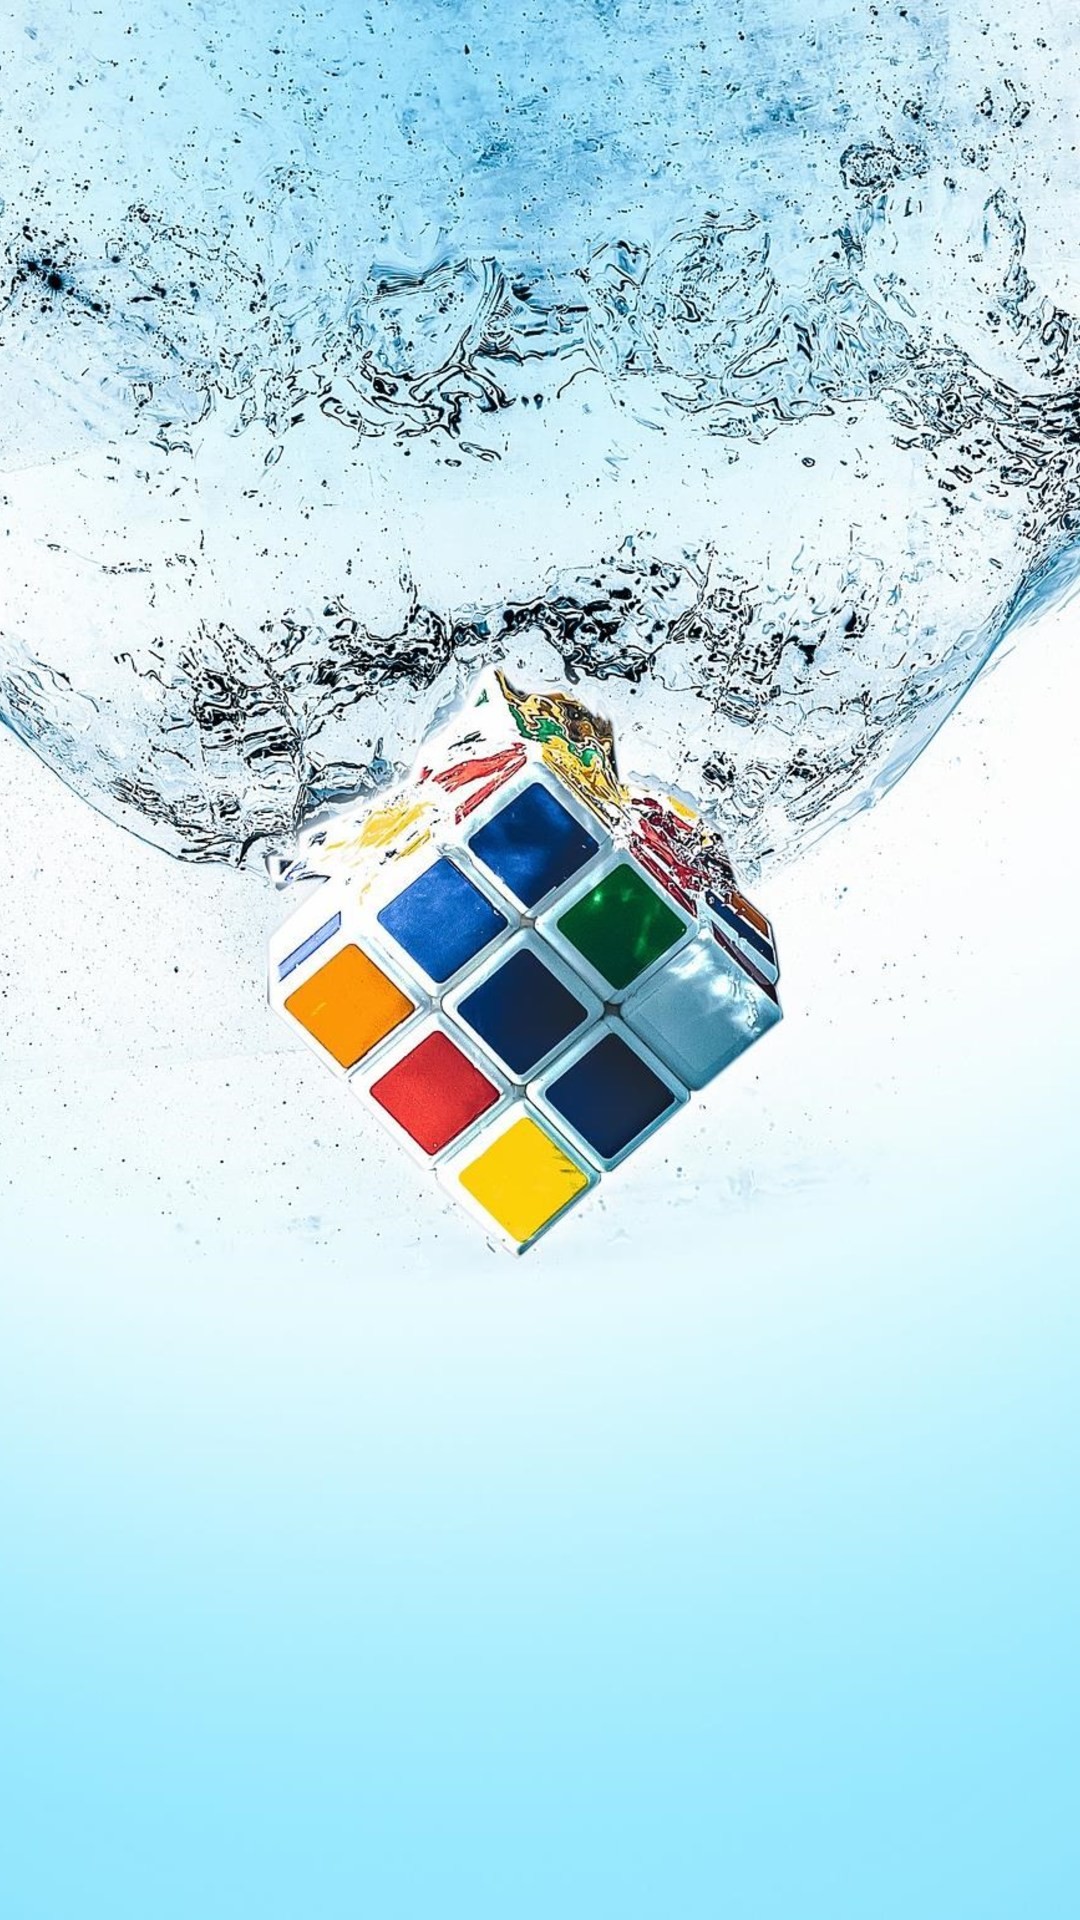 Rubik Cube wallpaper by gterritory  Download on ZEDGE  645e